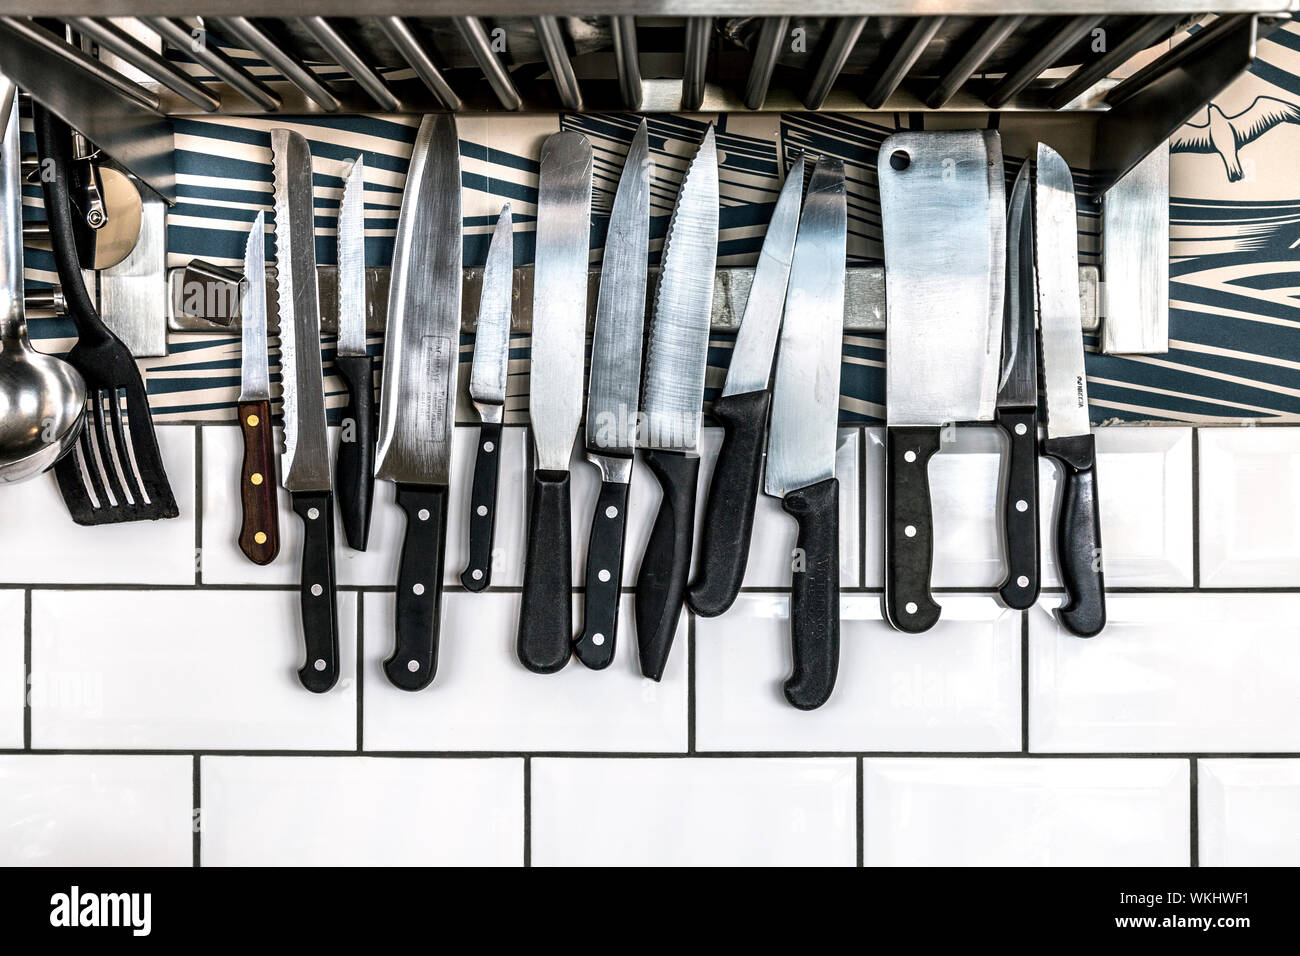 Kitchen knives on a magnetic bar holder on the wall Stock Photo